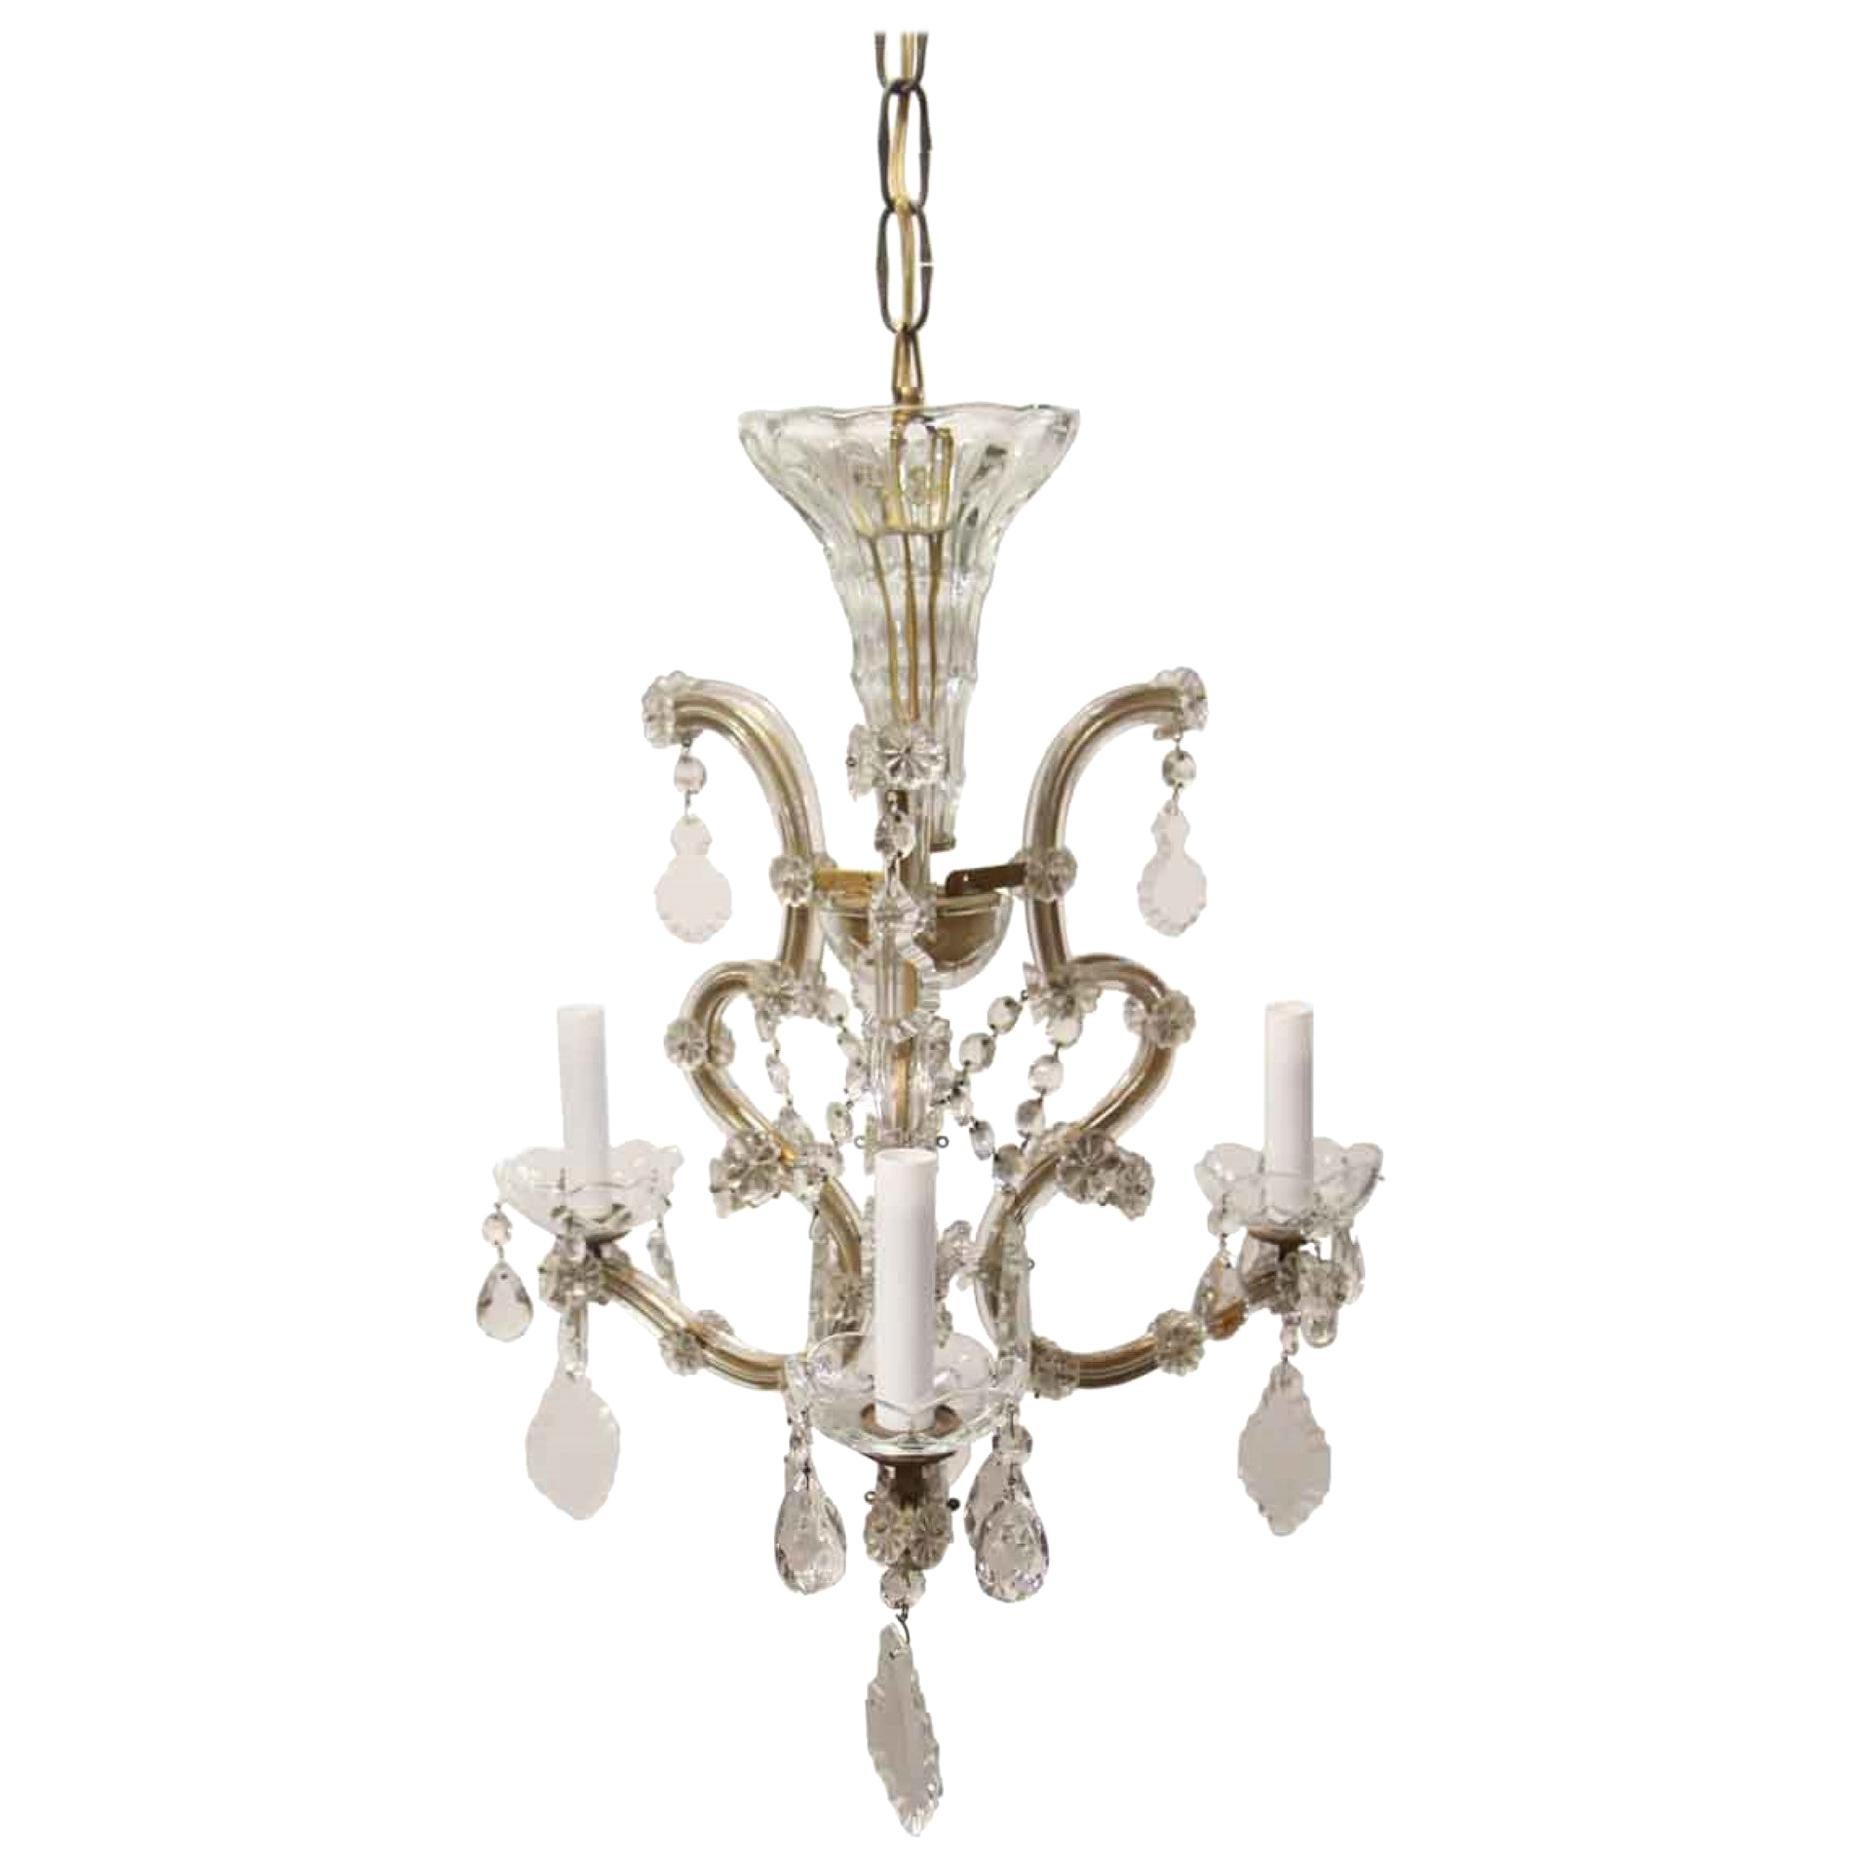 1930s Petite Marie Therese Crystal Chandelier with Three Arms and Lights